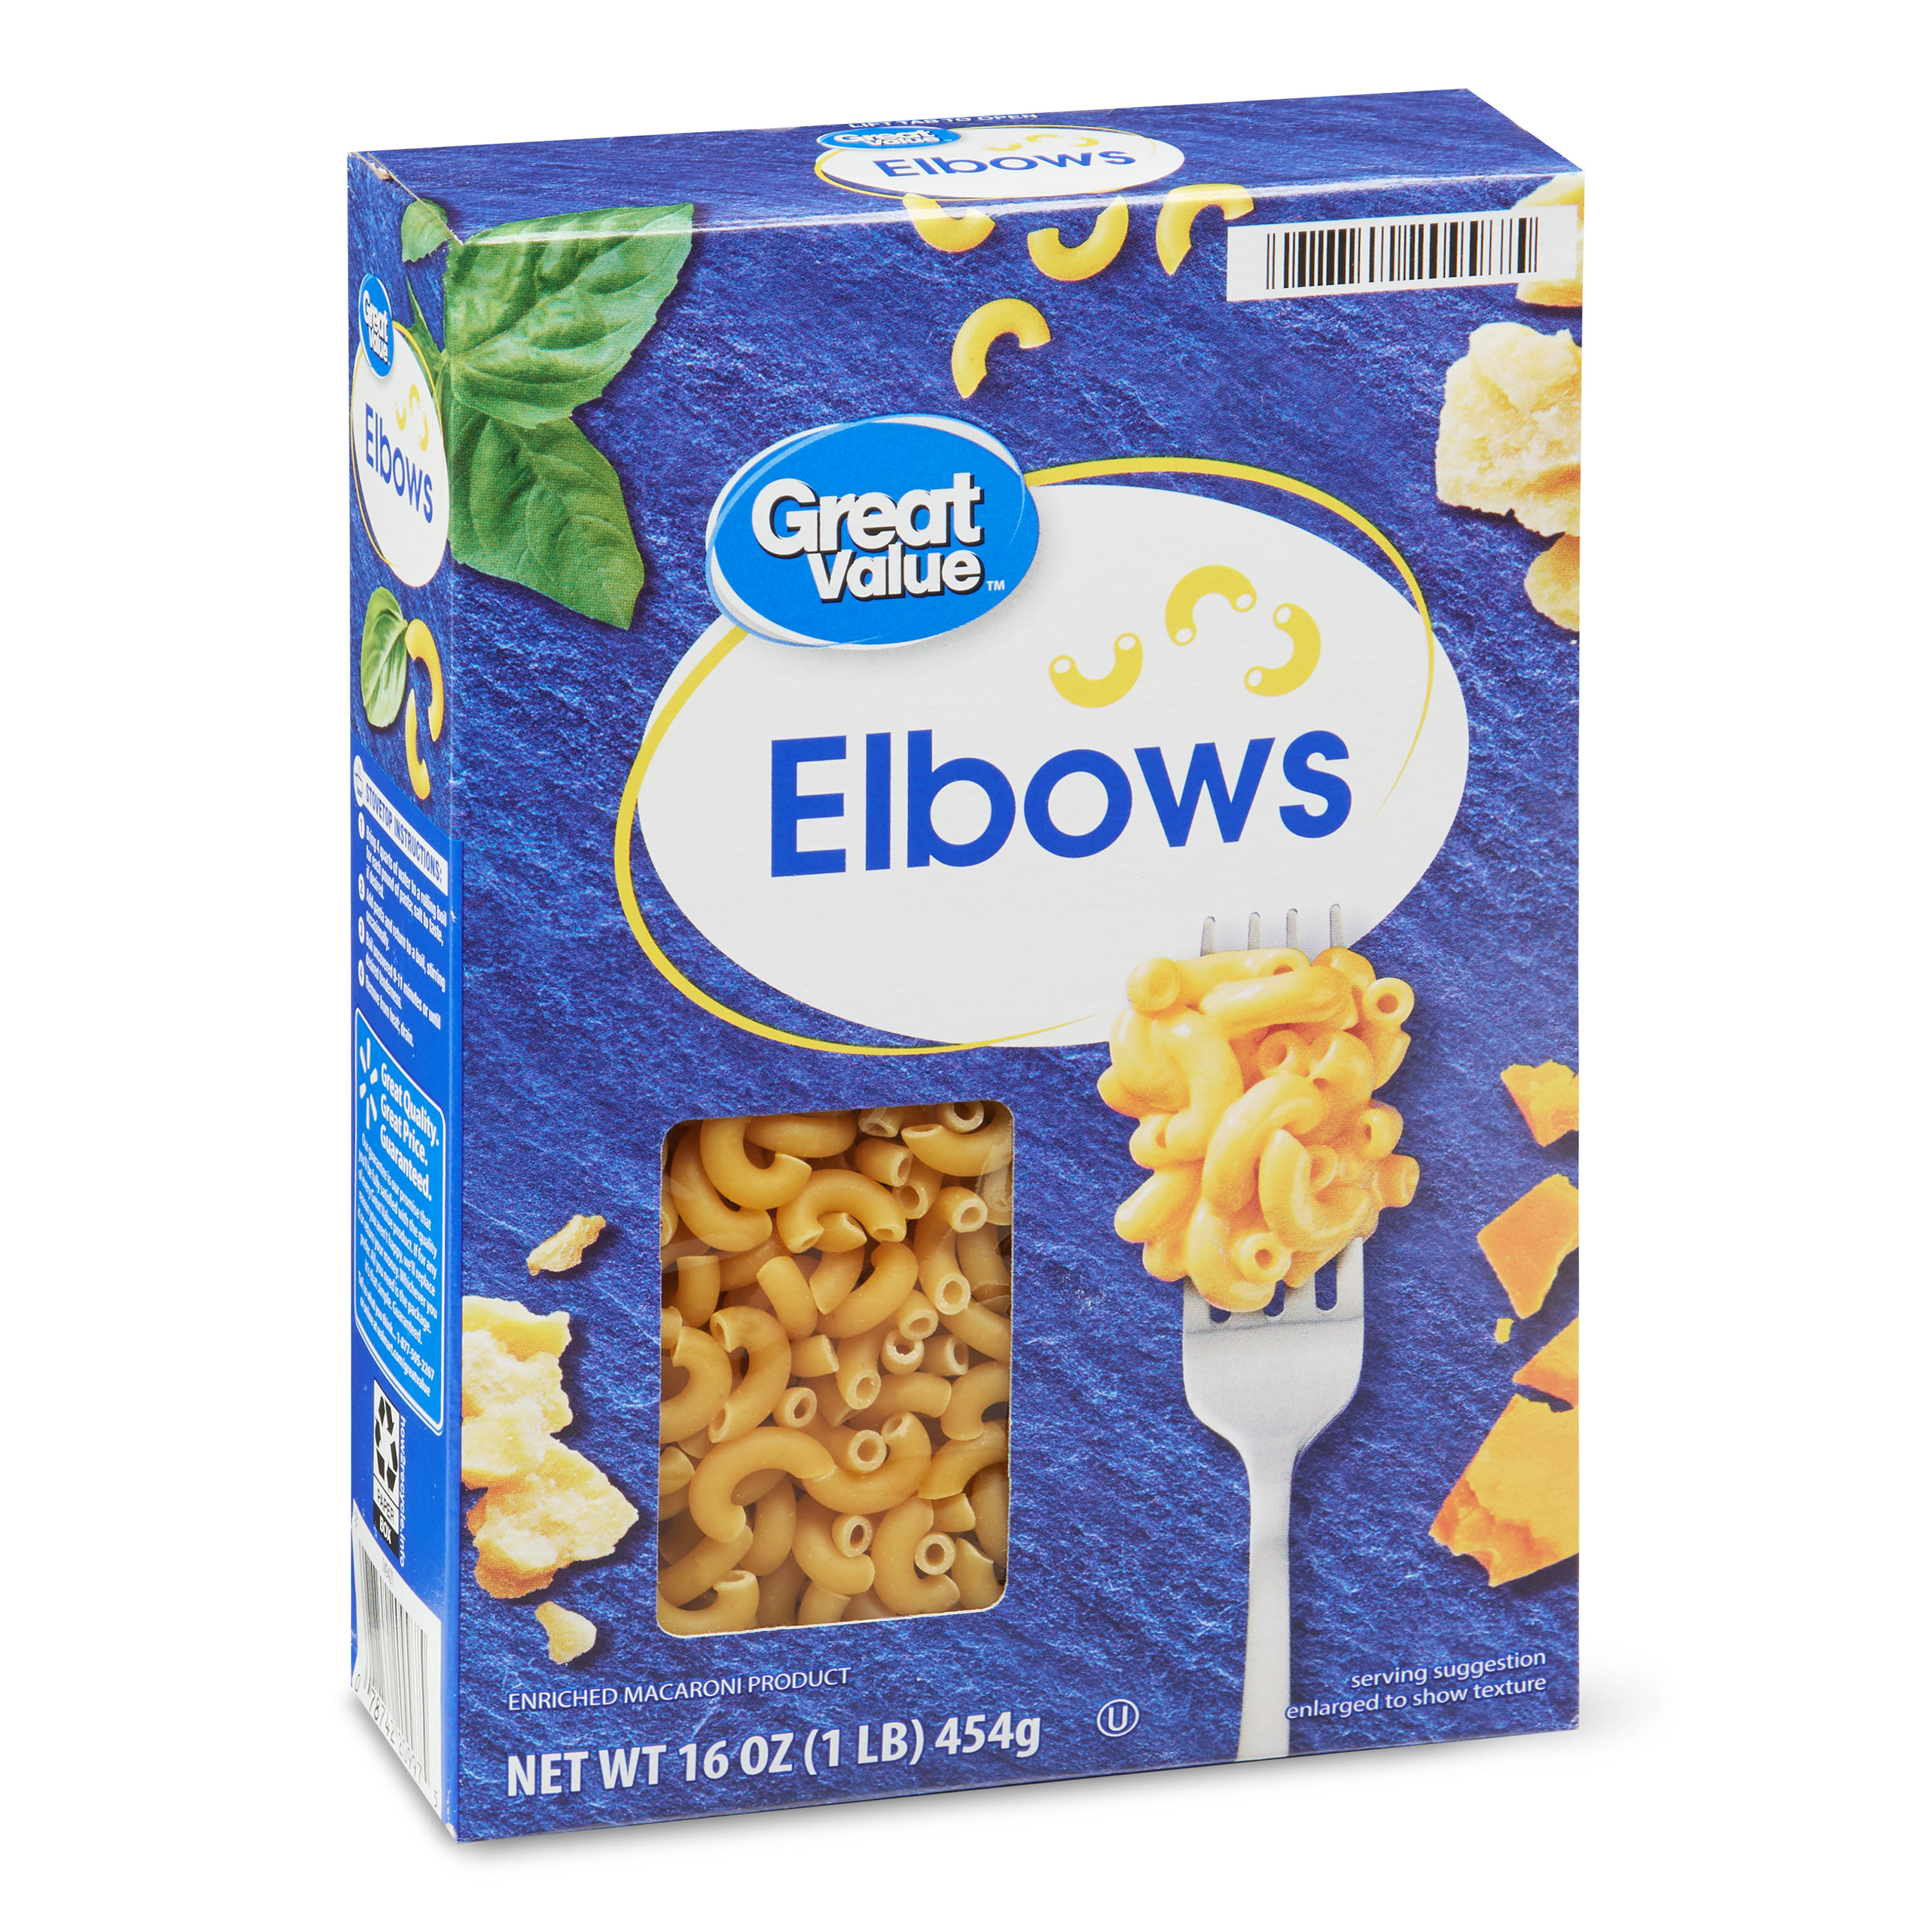 (4 Pack) Great Value Elbows Pasta, 16 Oz Image